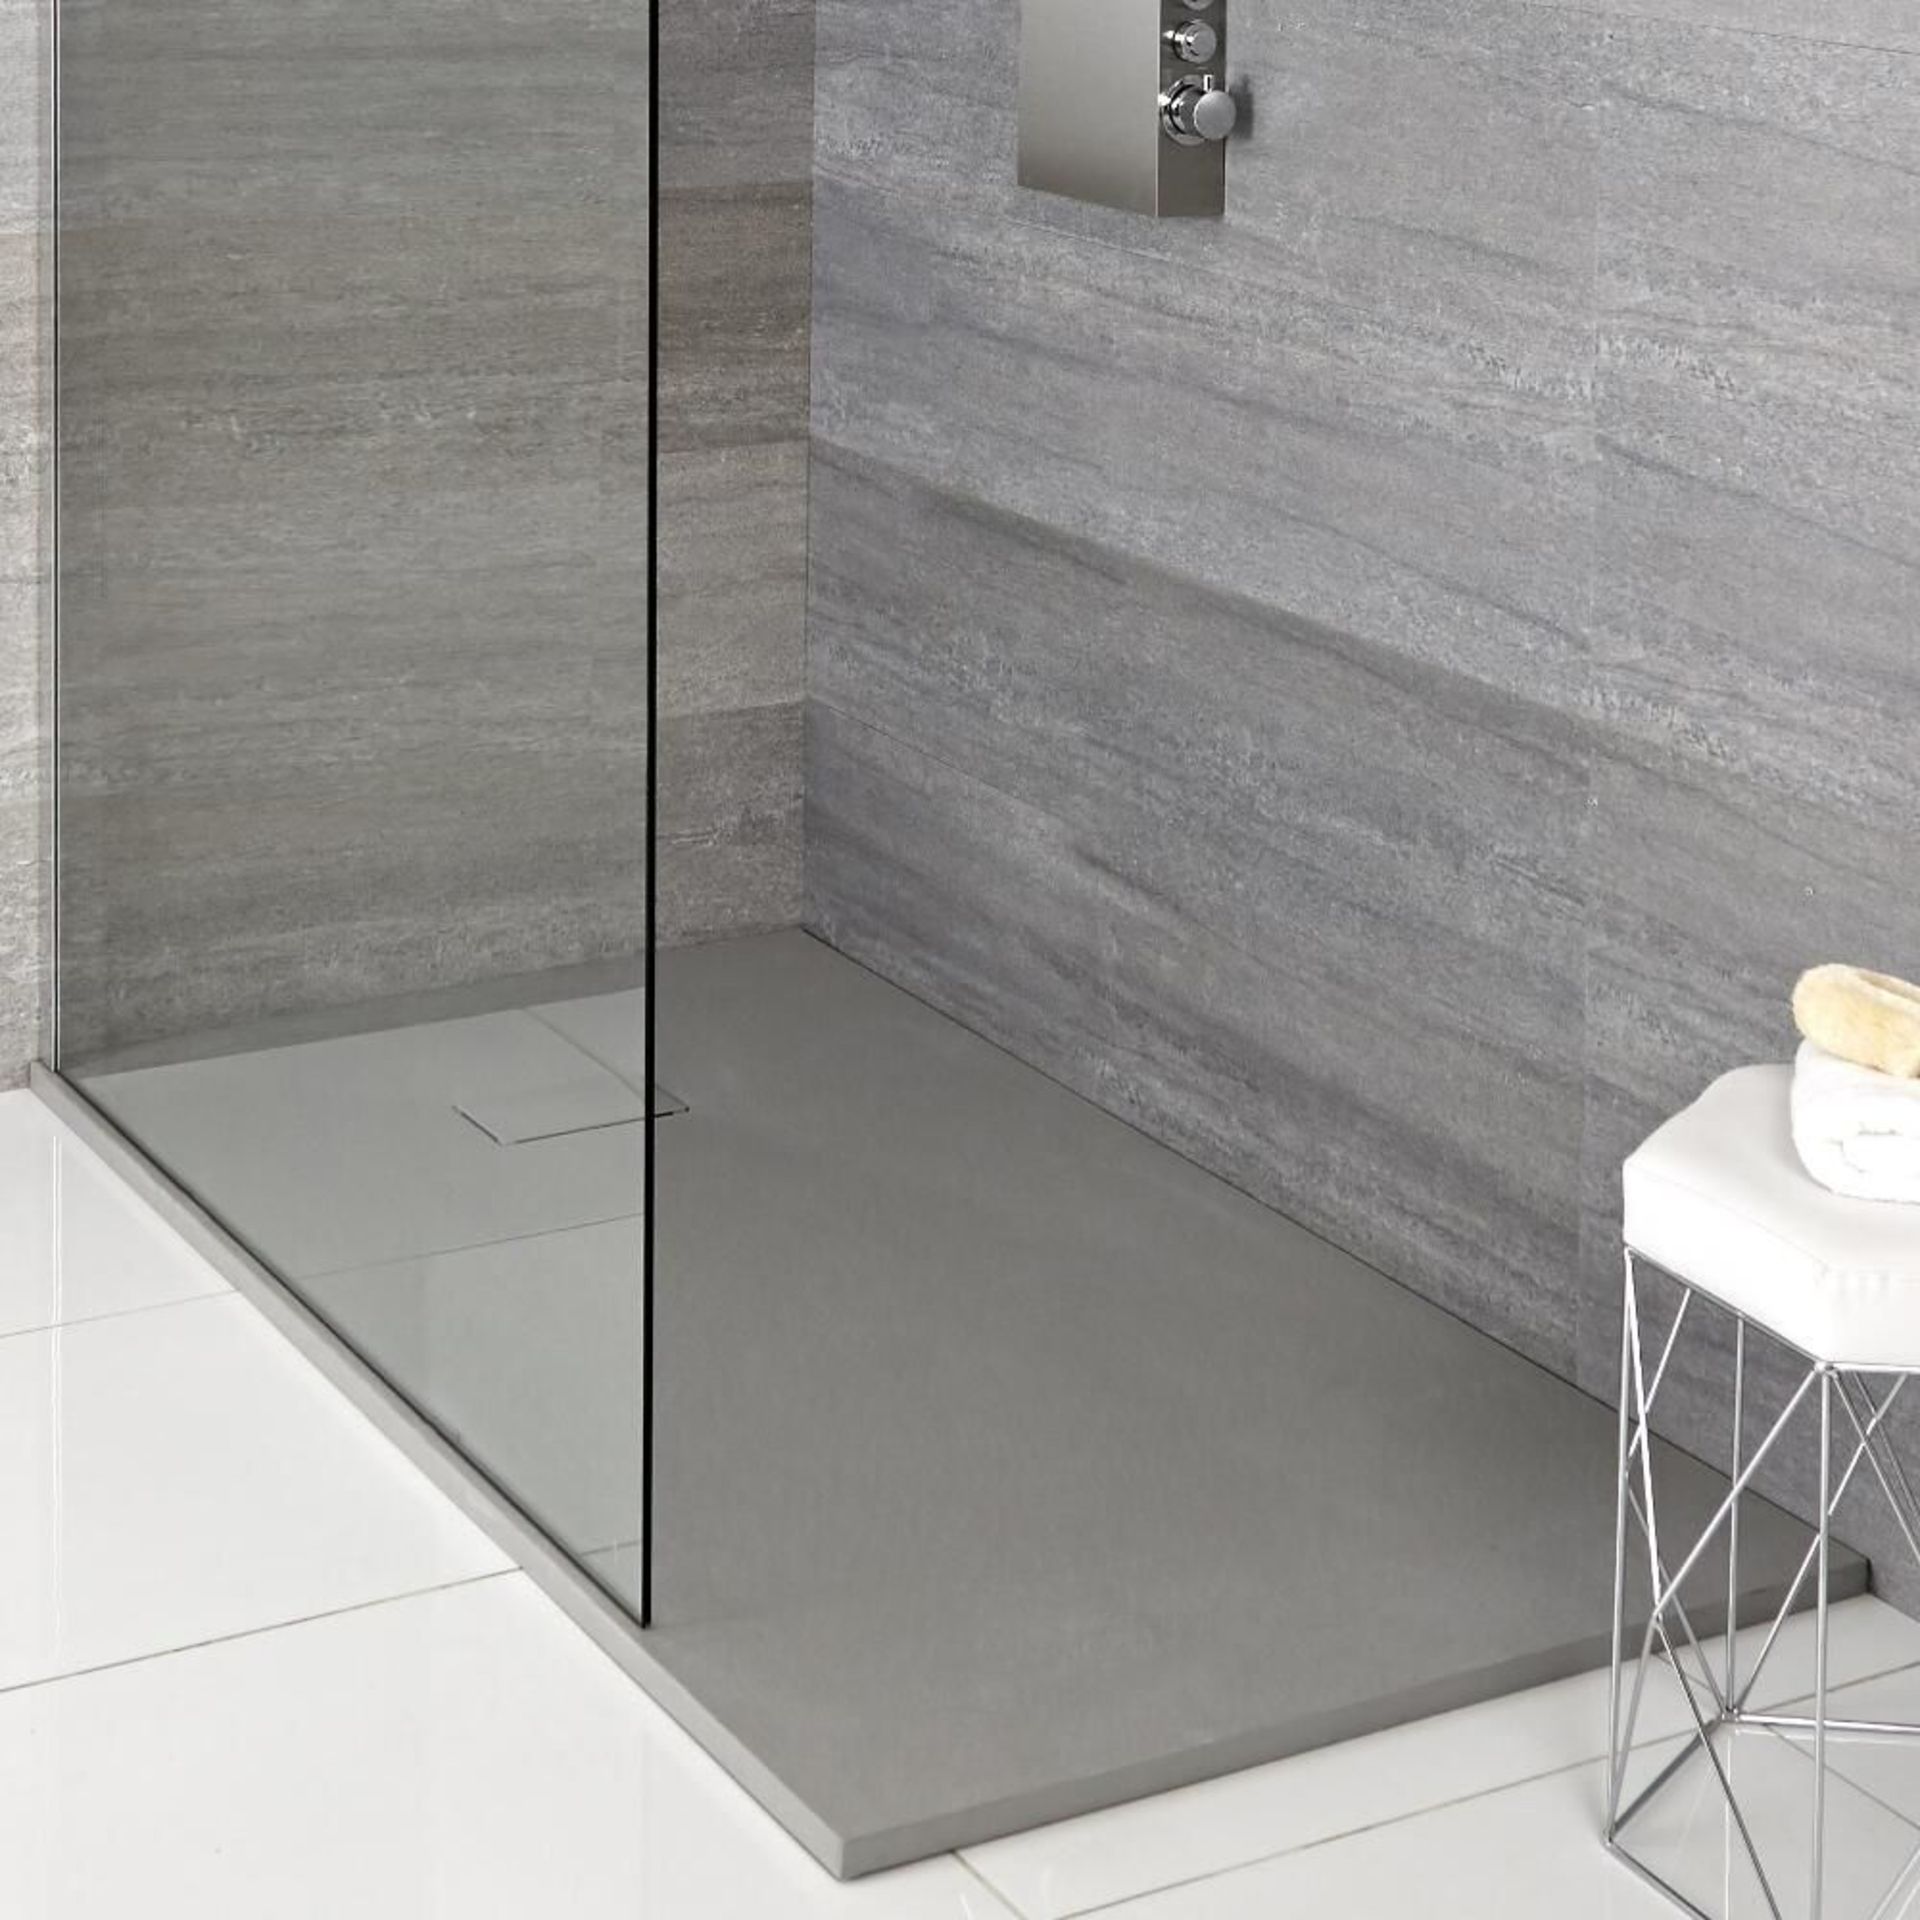 (AX45) New Slate Rectangular Shower Tray Grey 1000 x 800mm. RRP £307.00 - Image 2 of 2